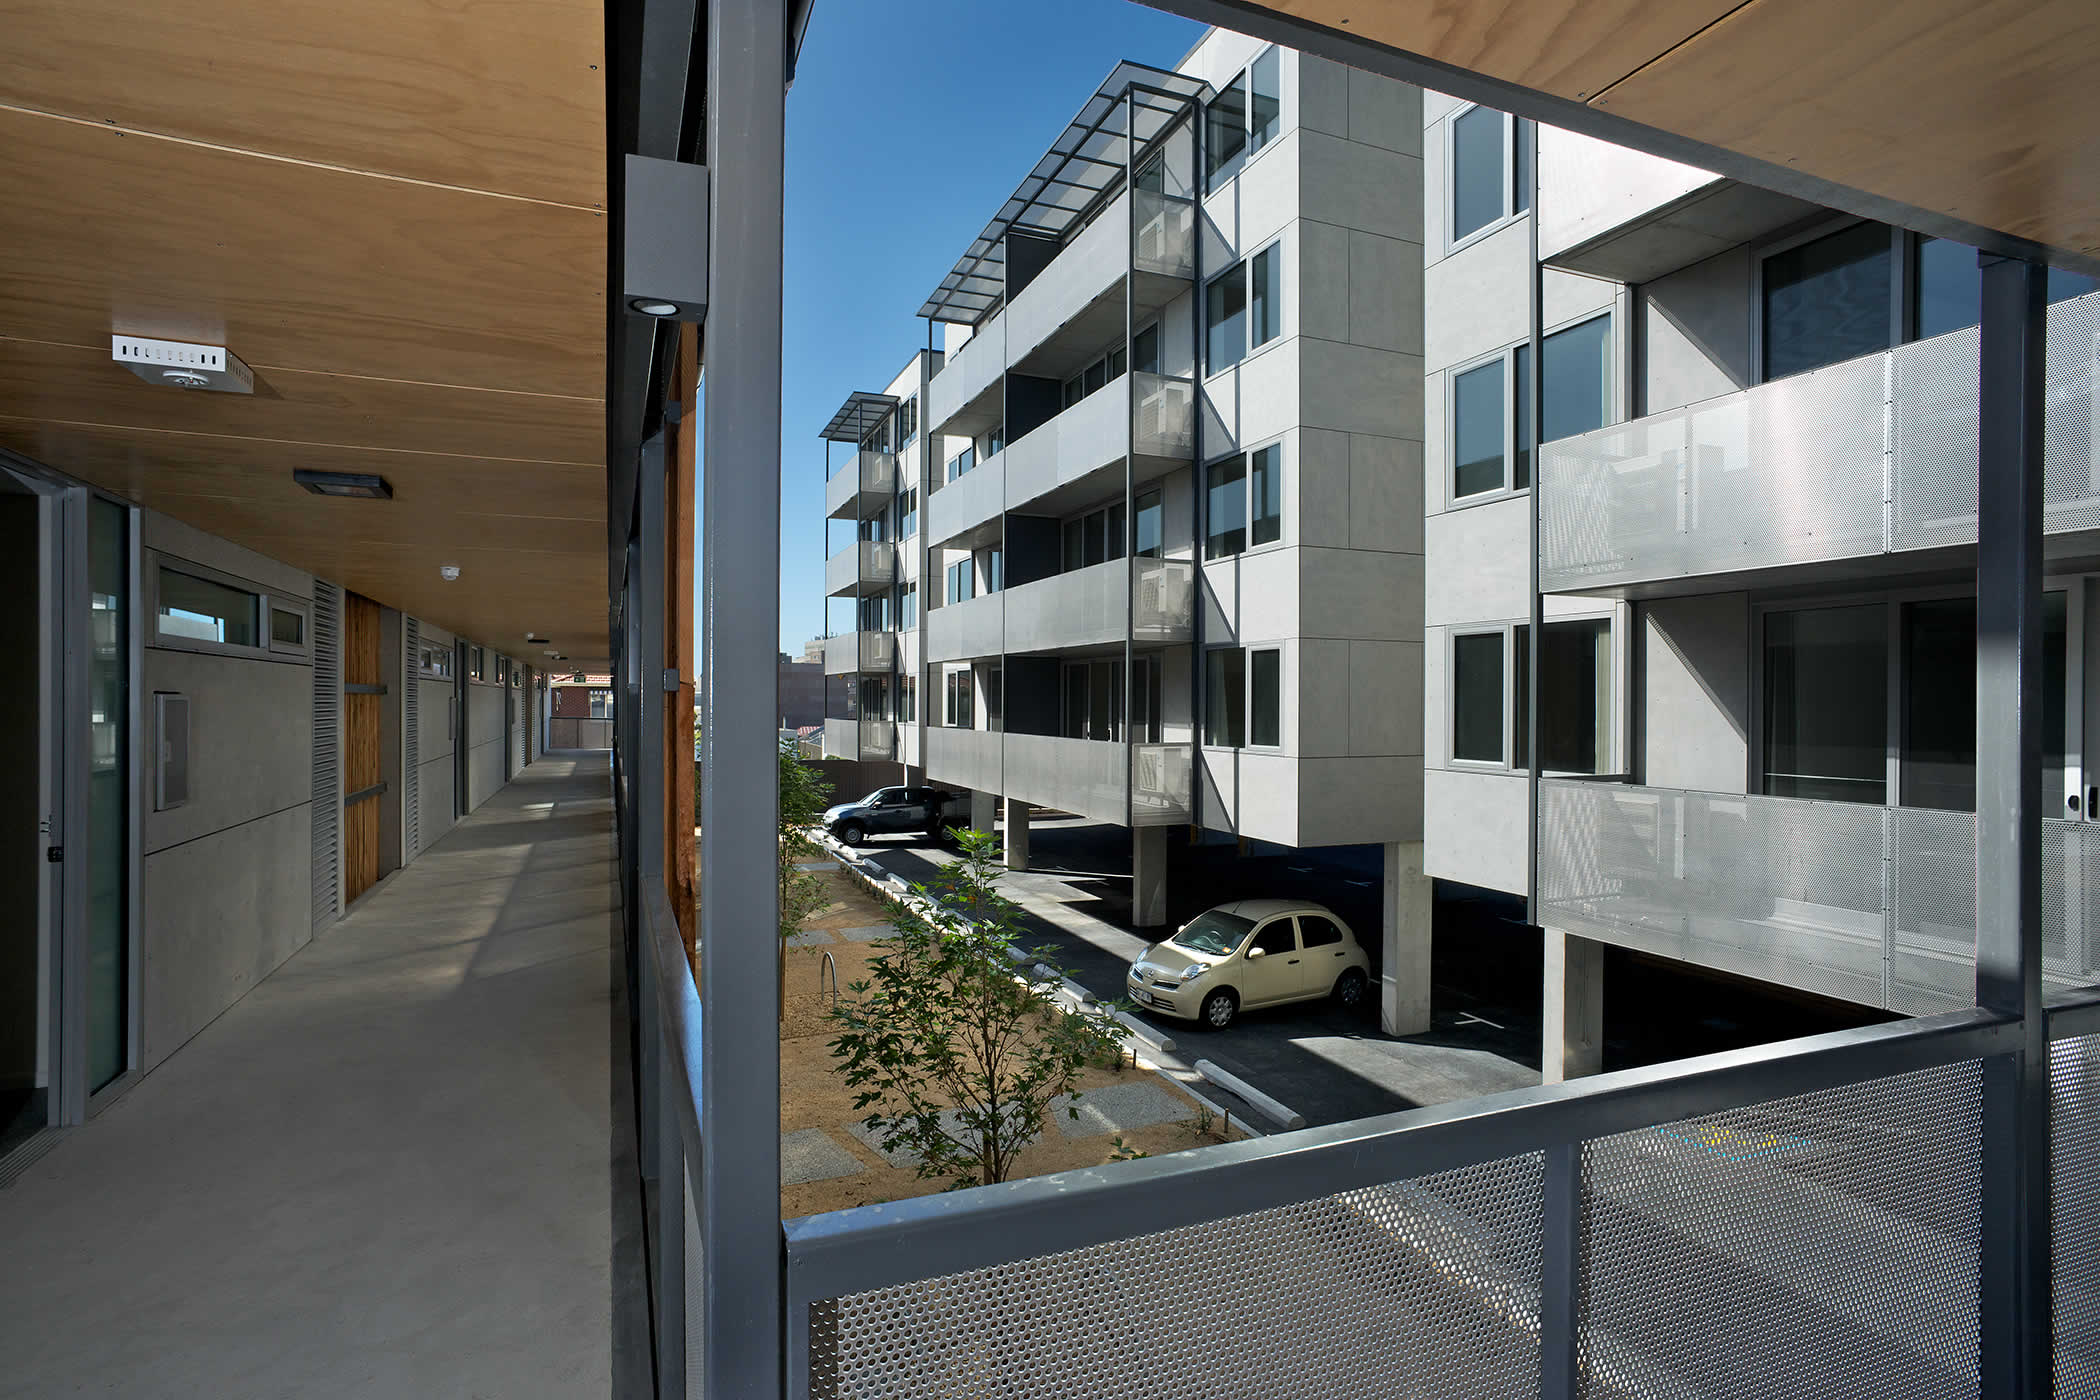 40 Brisbane Street, Hobart, Tasmania: The form breaks open to create a central courtyard bringing north sunlight into the apartments and a sense of health and well being into the heart of the scheme. Photo by Ray Joyce.